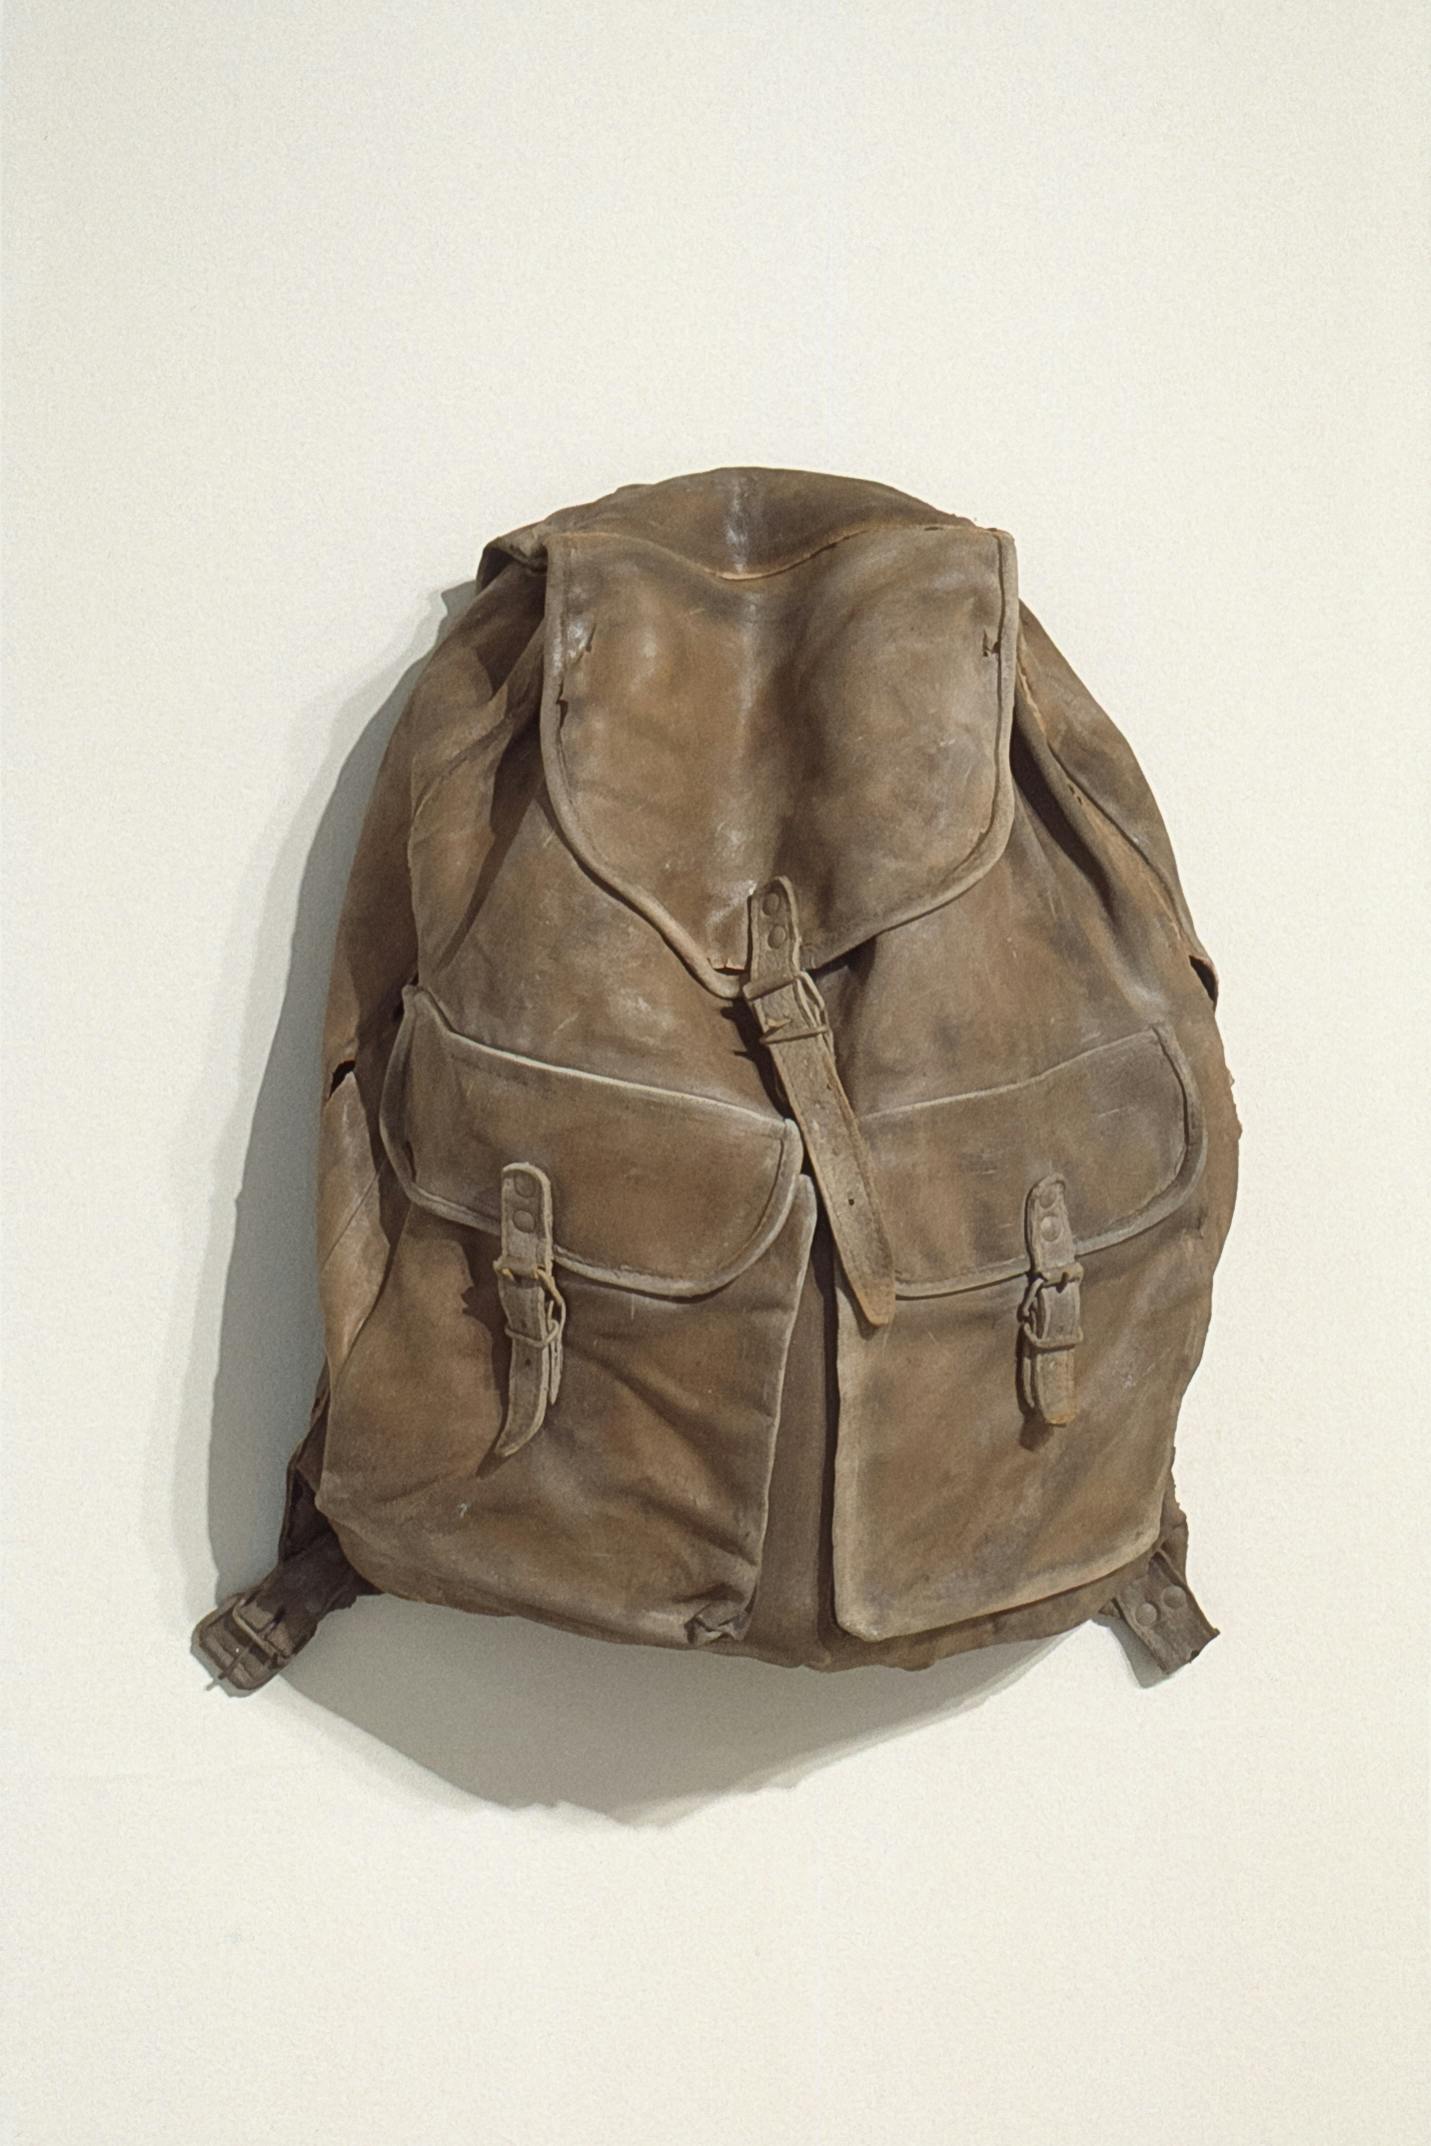 A small brown backpack with two front pockets is installed on the white gallery wall. The bag is fully closed and looks heavy. Viewers are given no clue what would be stored inside this bag.  